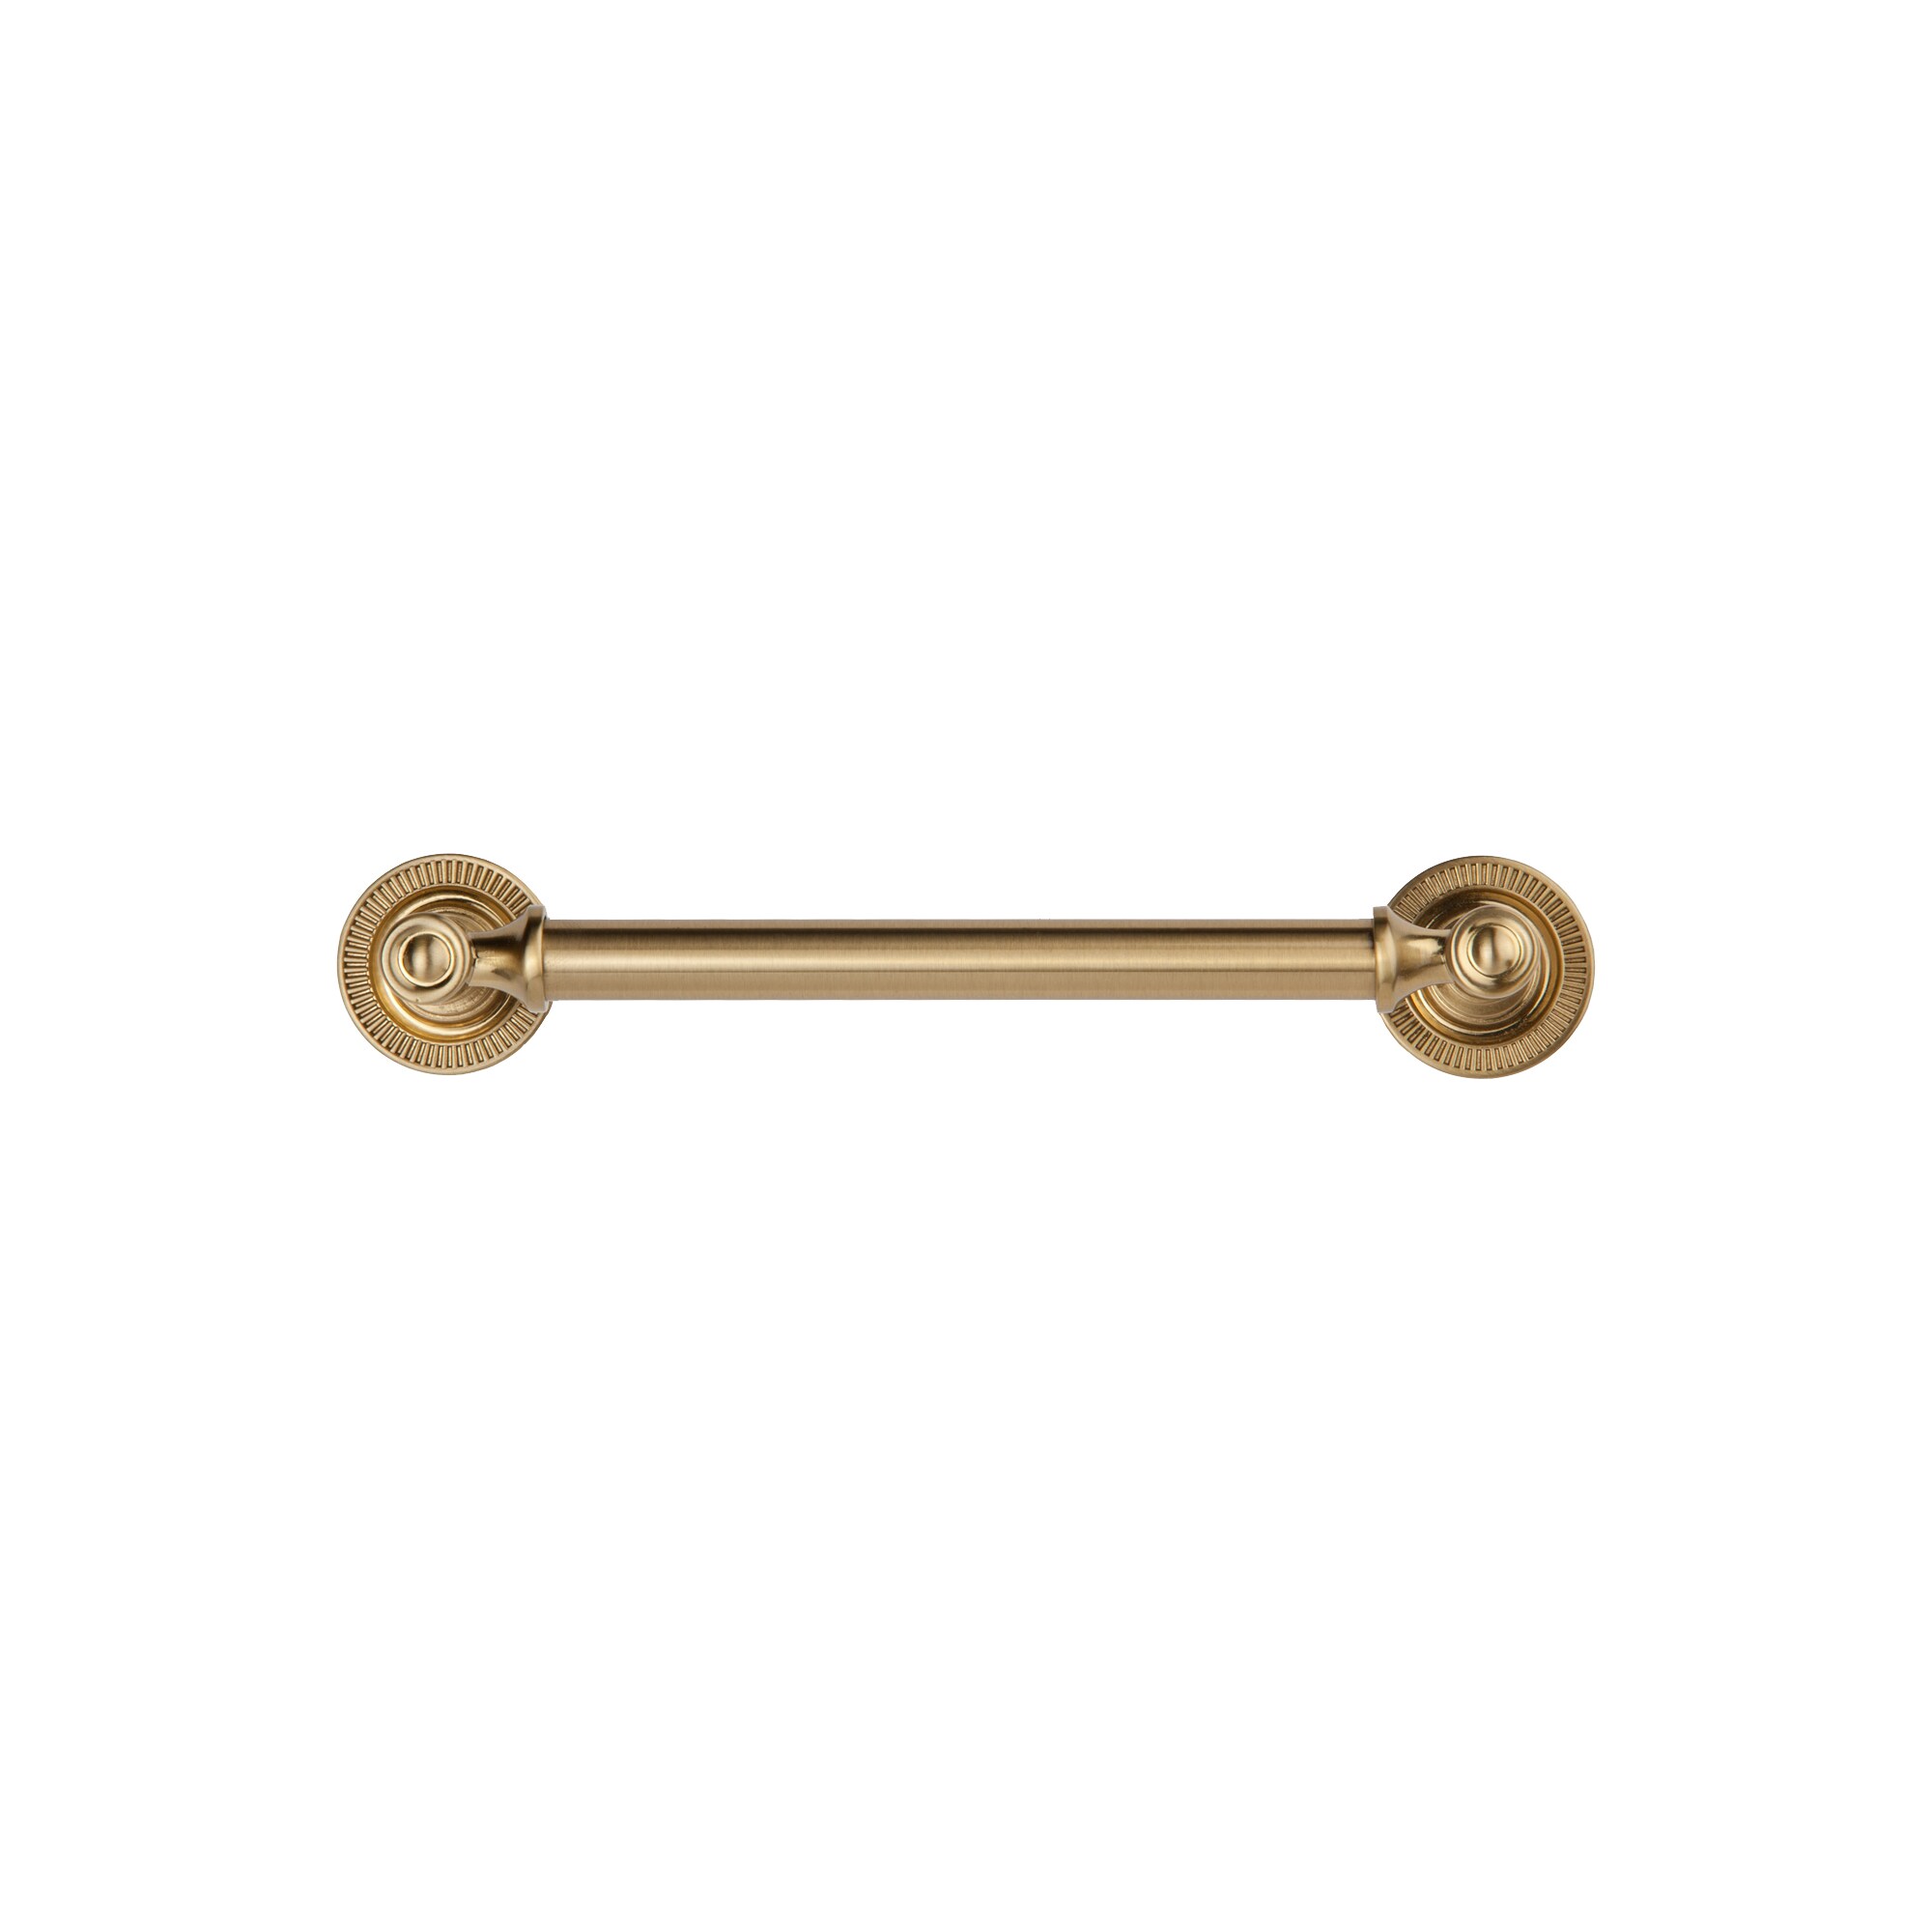 Sumner Street Home Hardware Minted 6-in Center to Center Satin Brass  Cylindrical Bar Drawer Pulls